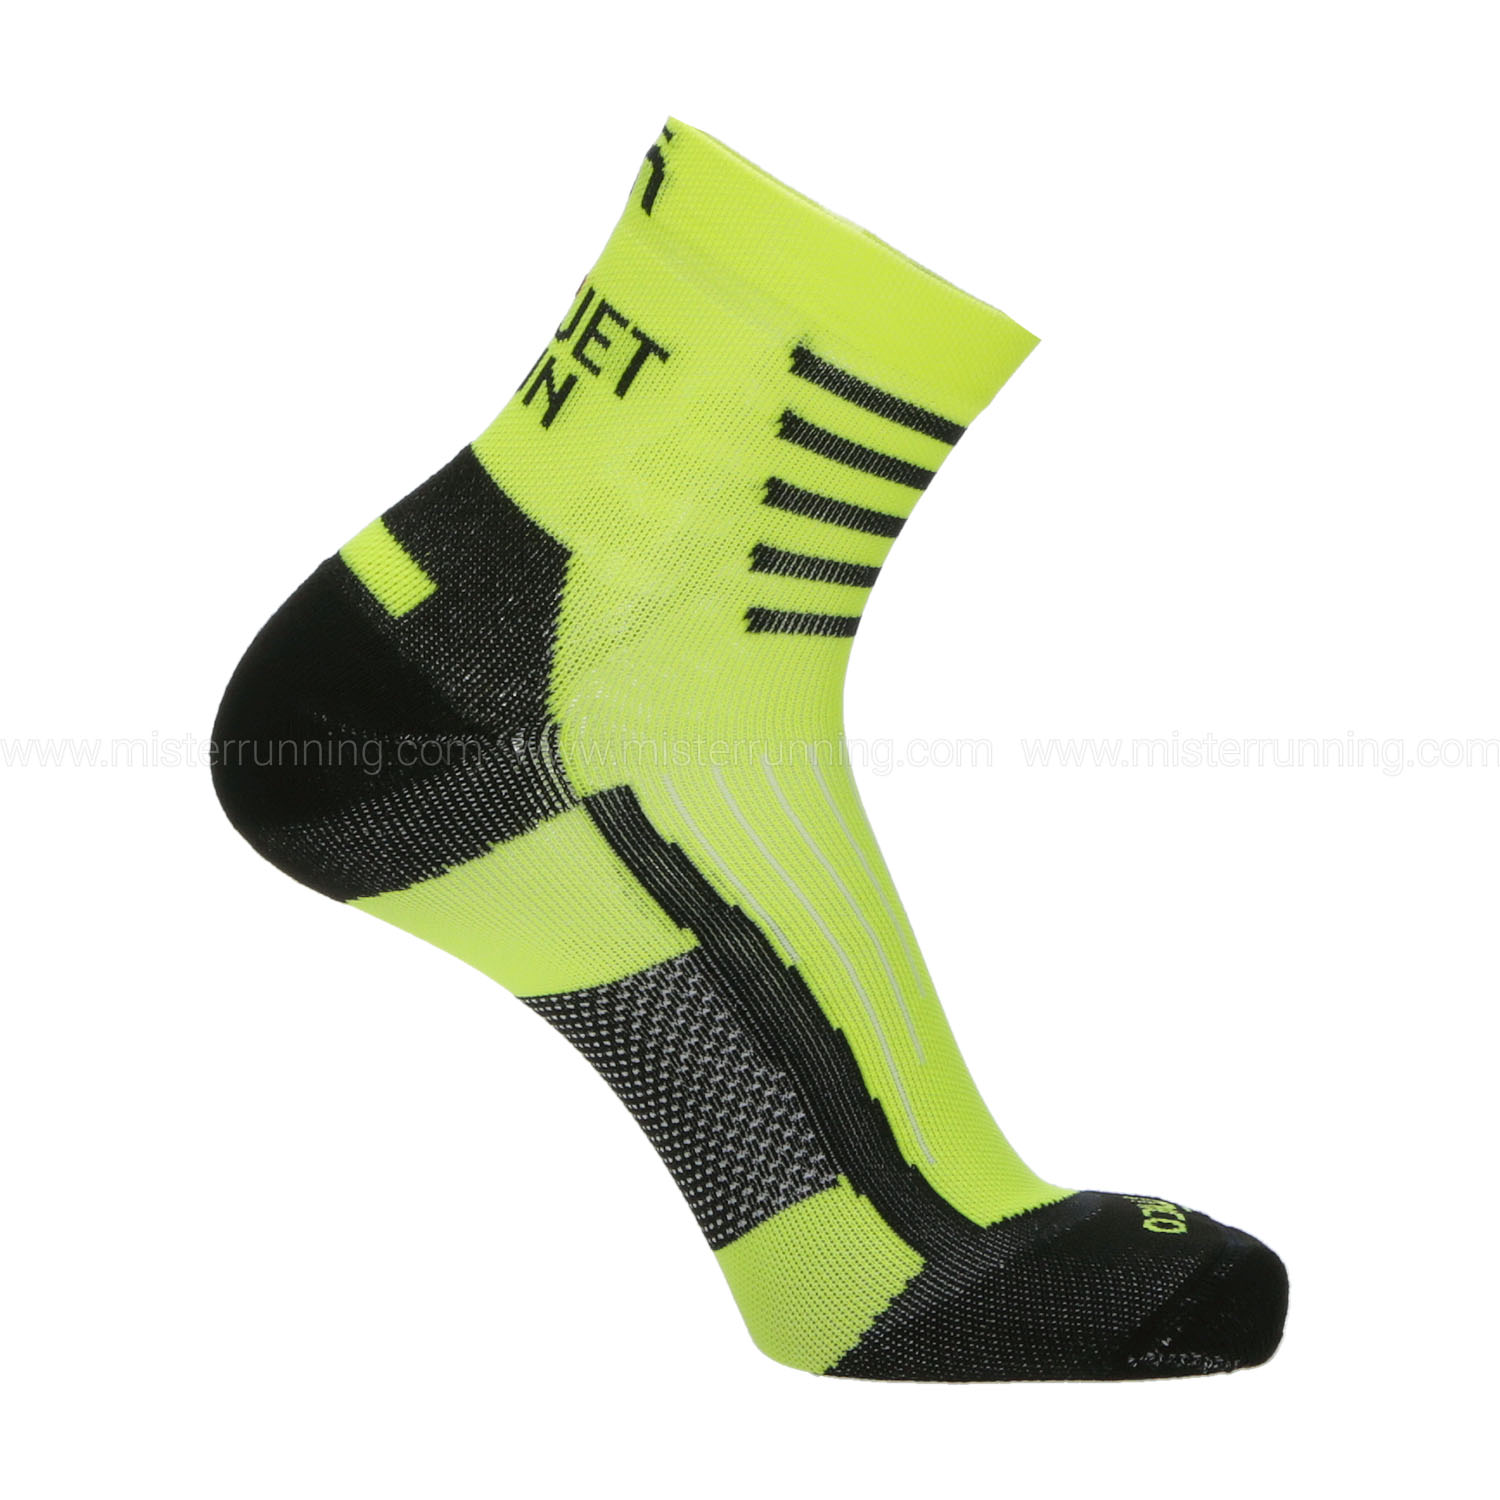 Mico Oxi-jet Light Weight Compression Calcetines - Giallo Fluo